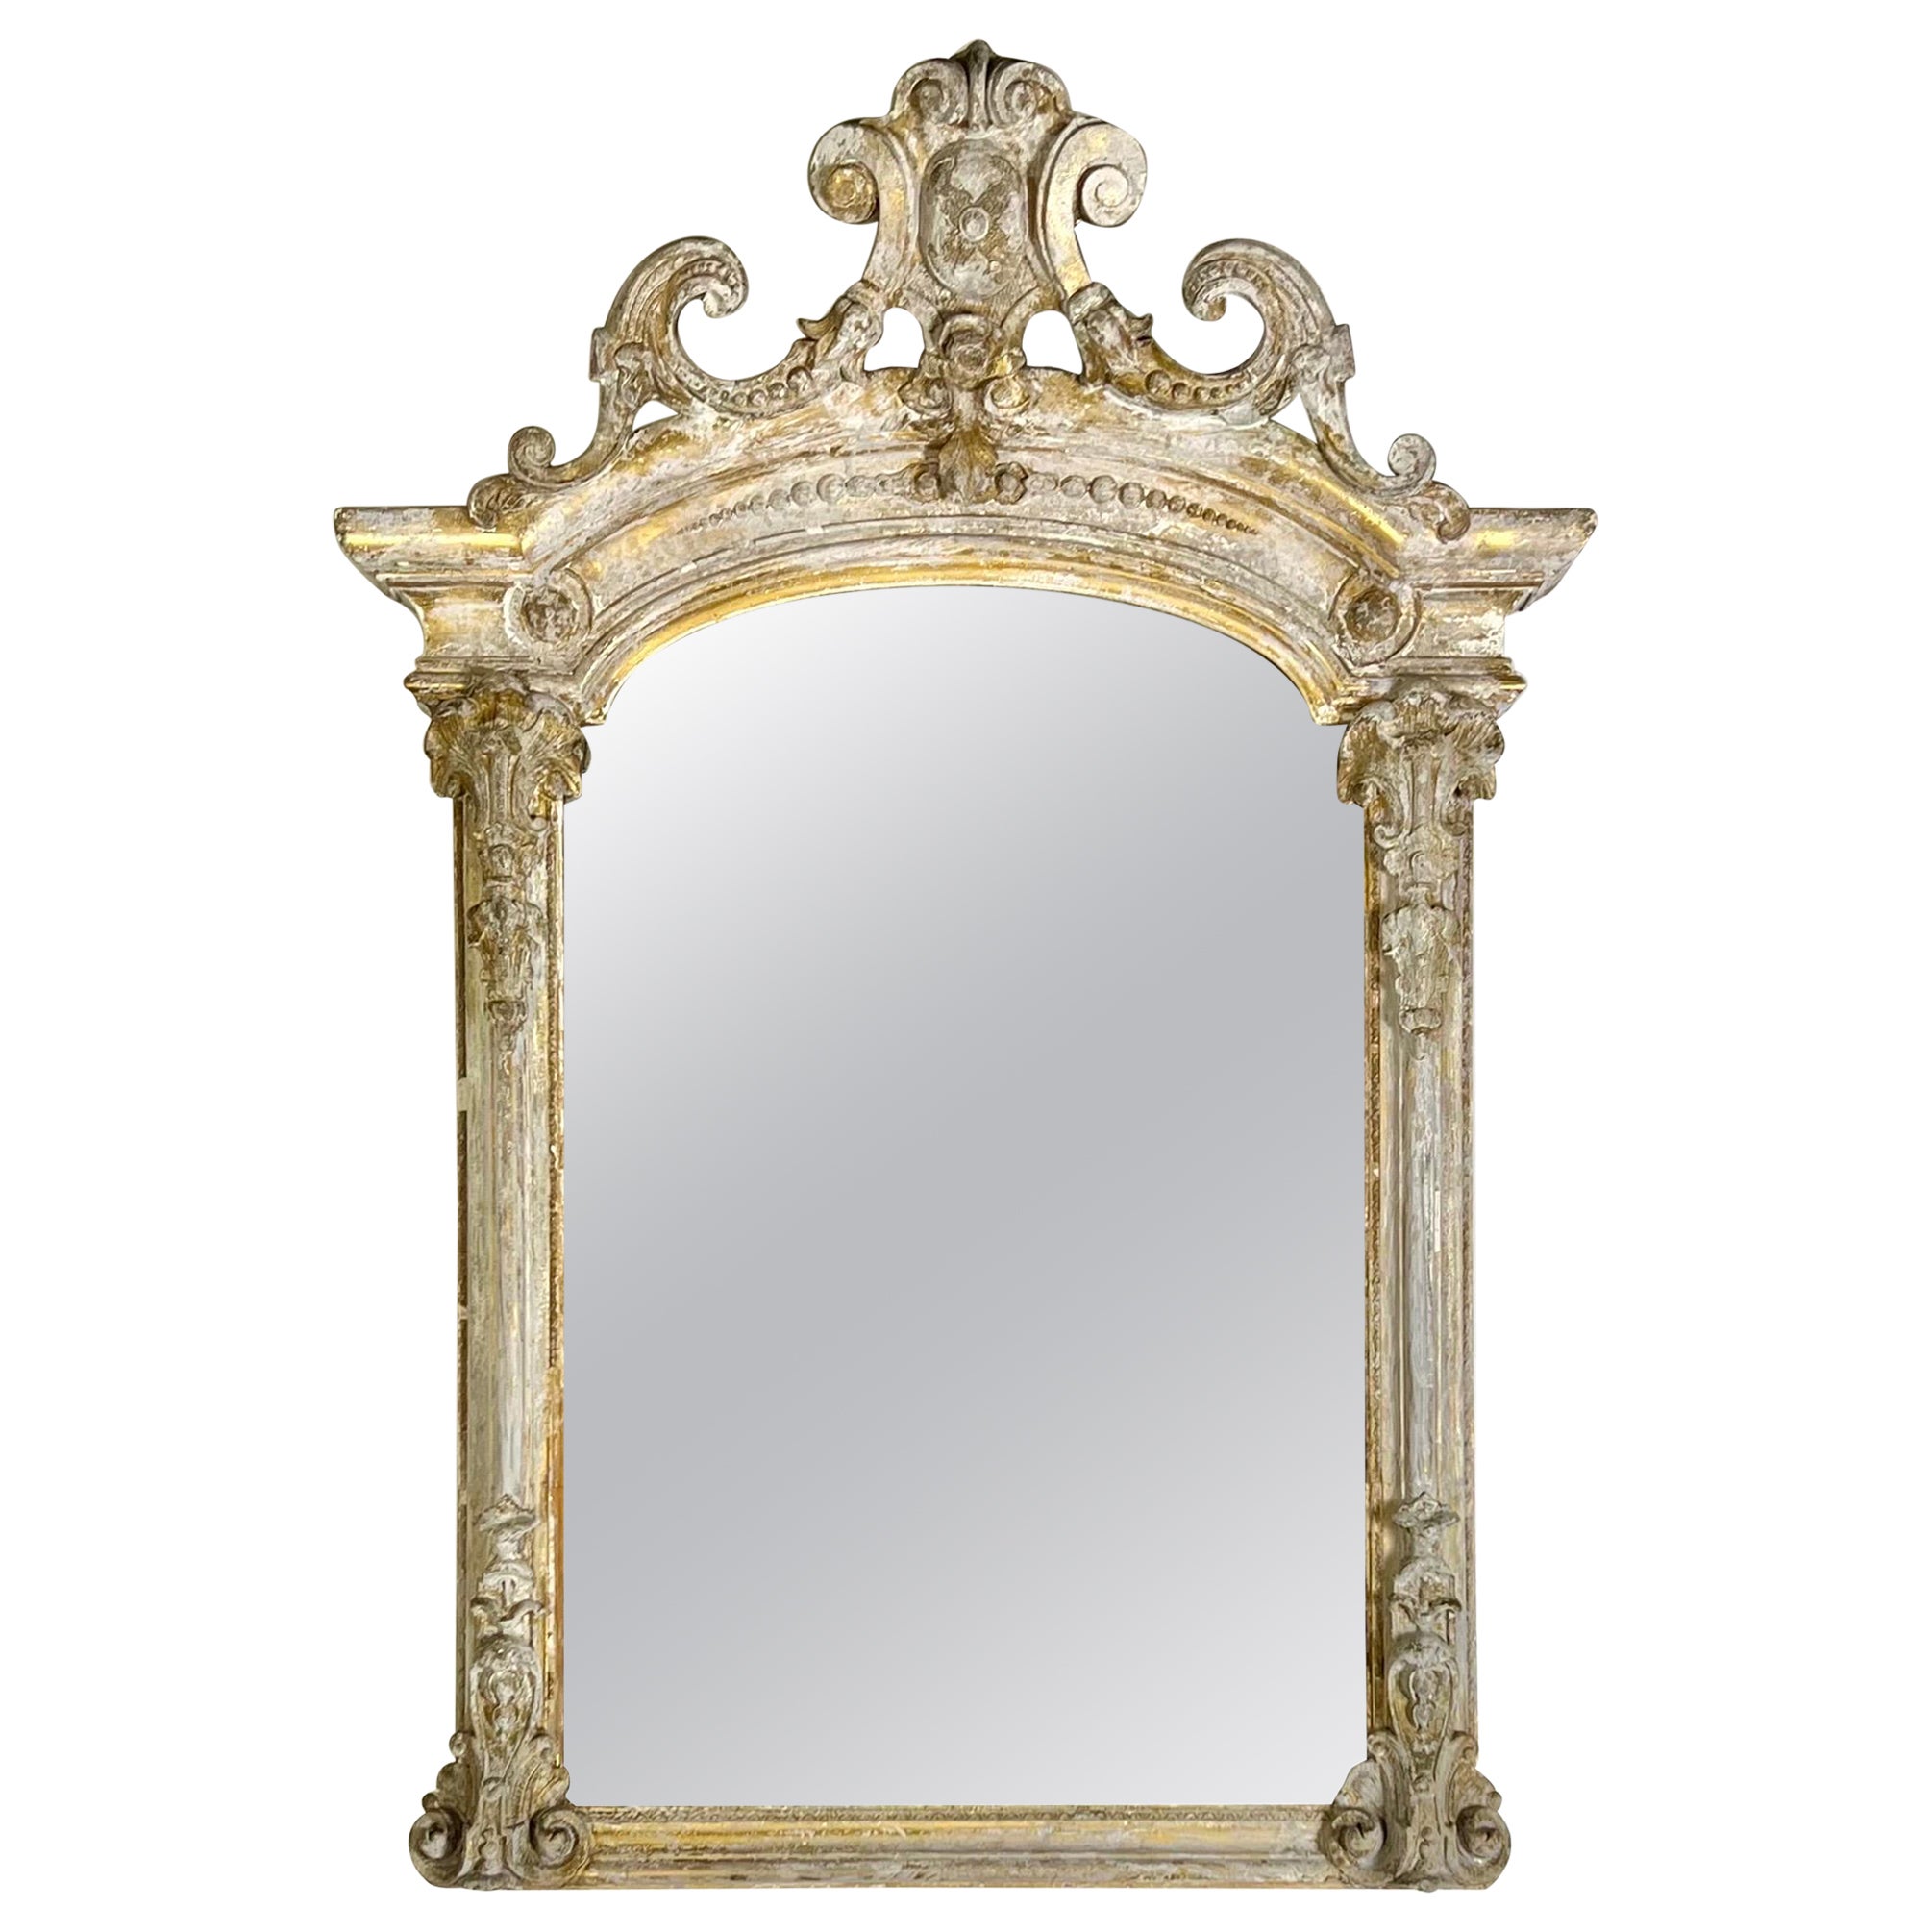 19th-Century French Rococo Style Painted Mirror